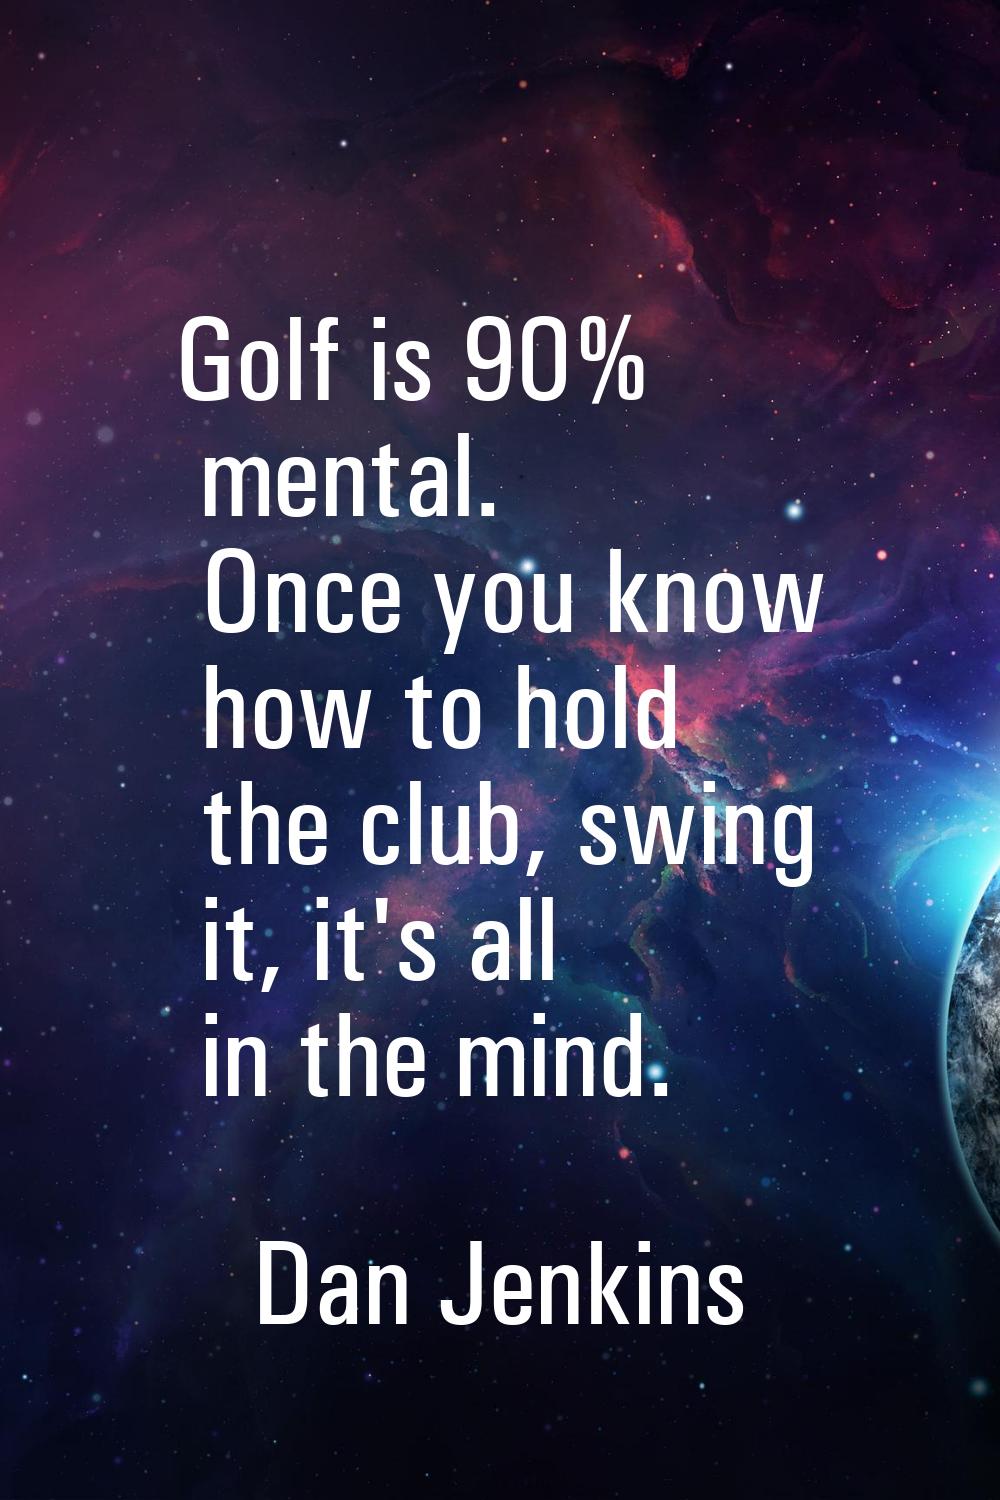 Golf is 90% mental. Once you know how to hold the club, swing it, it's all in the mind.